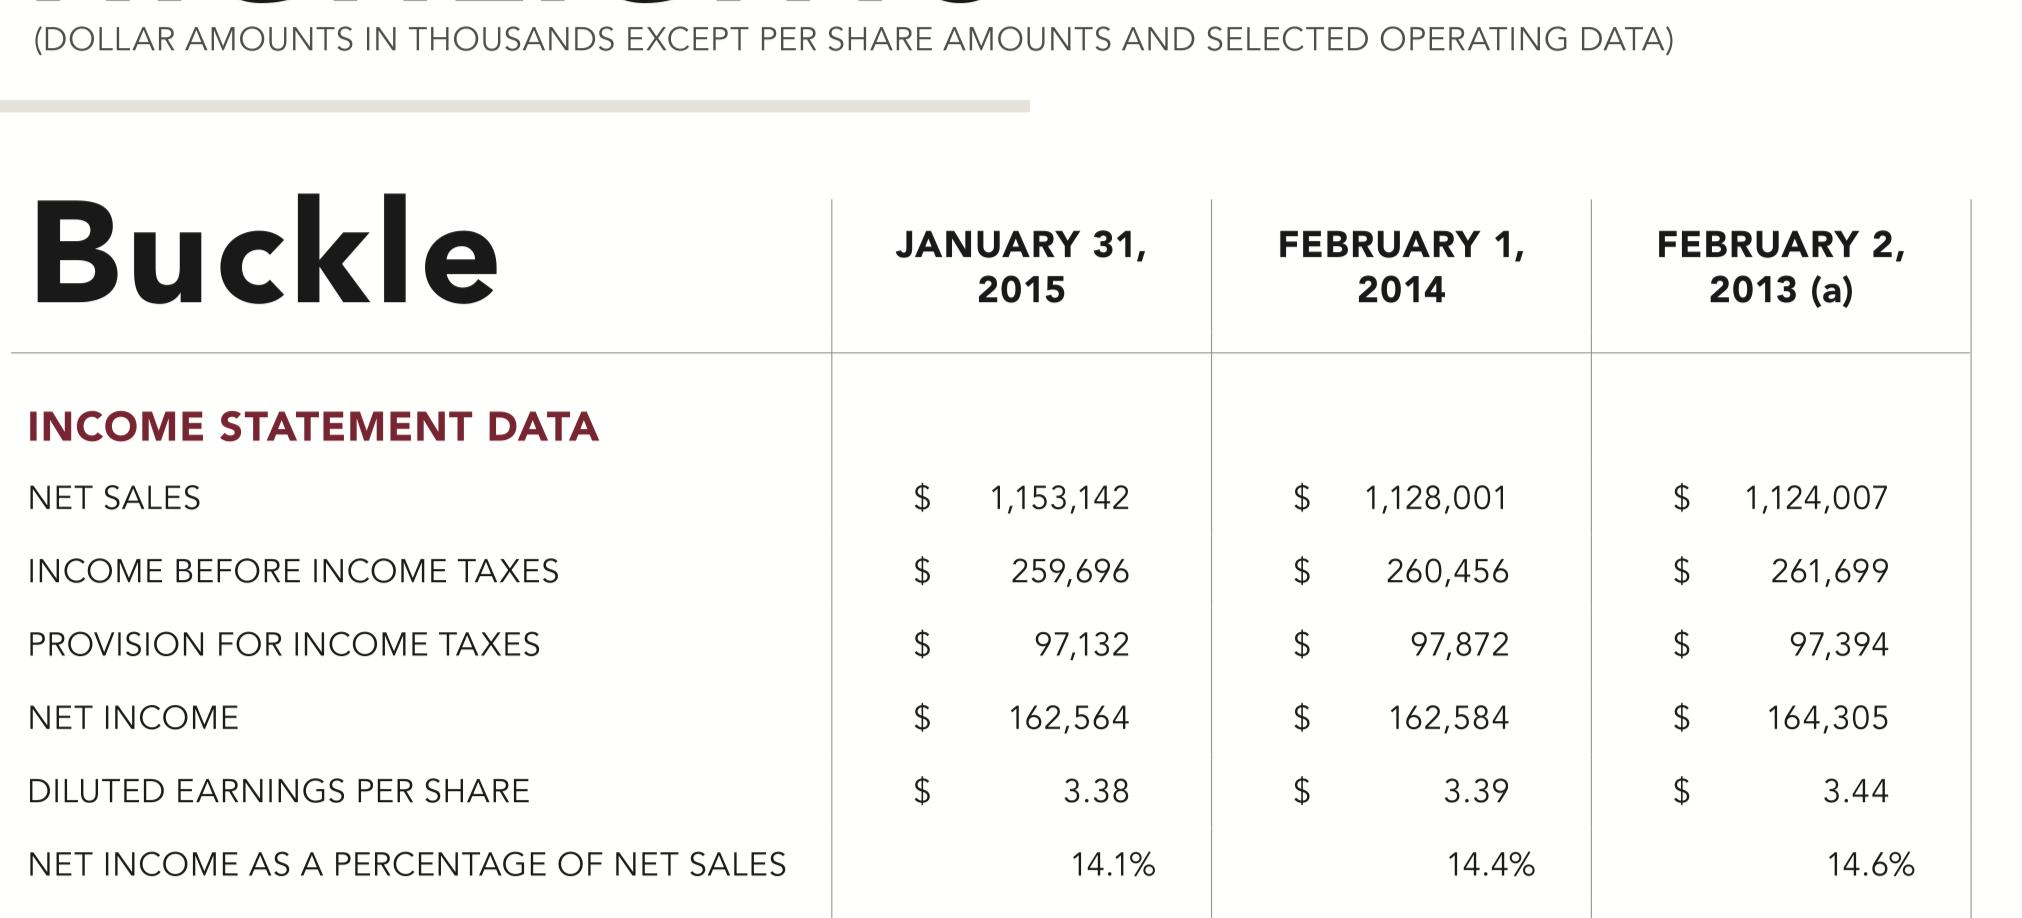 (DOLLAR AMOUNTS IN THOUSANDS EXCEPT PER SHARE AMOUNTS AND SELECTED OPERATING DATA) Buckle JANUARY 31, 2015 FEBRUARY 1, 2014 F